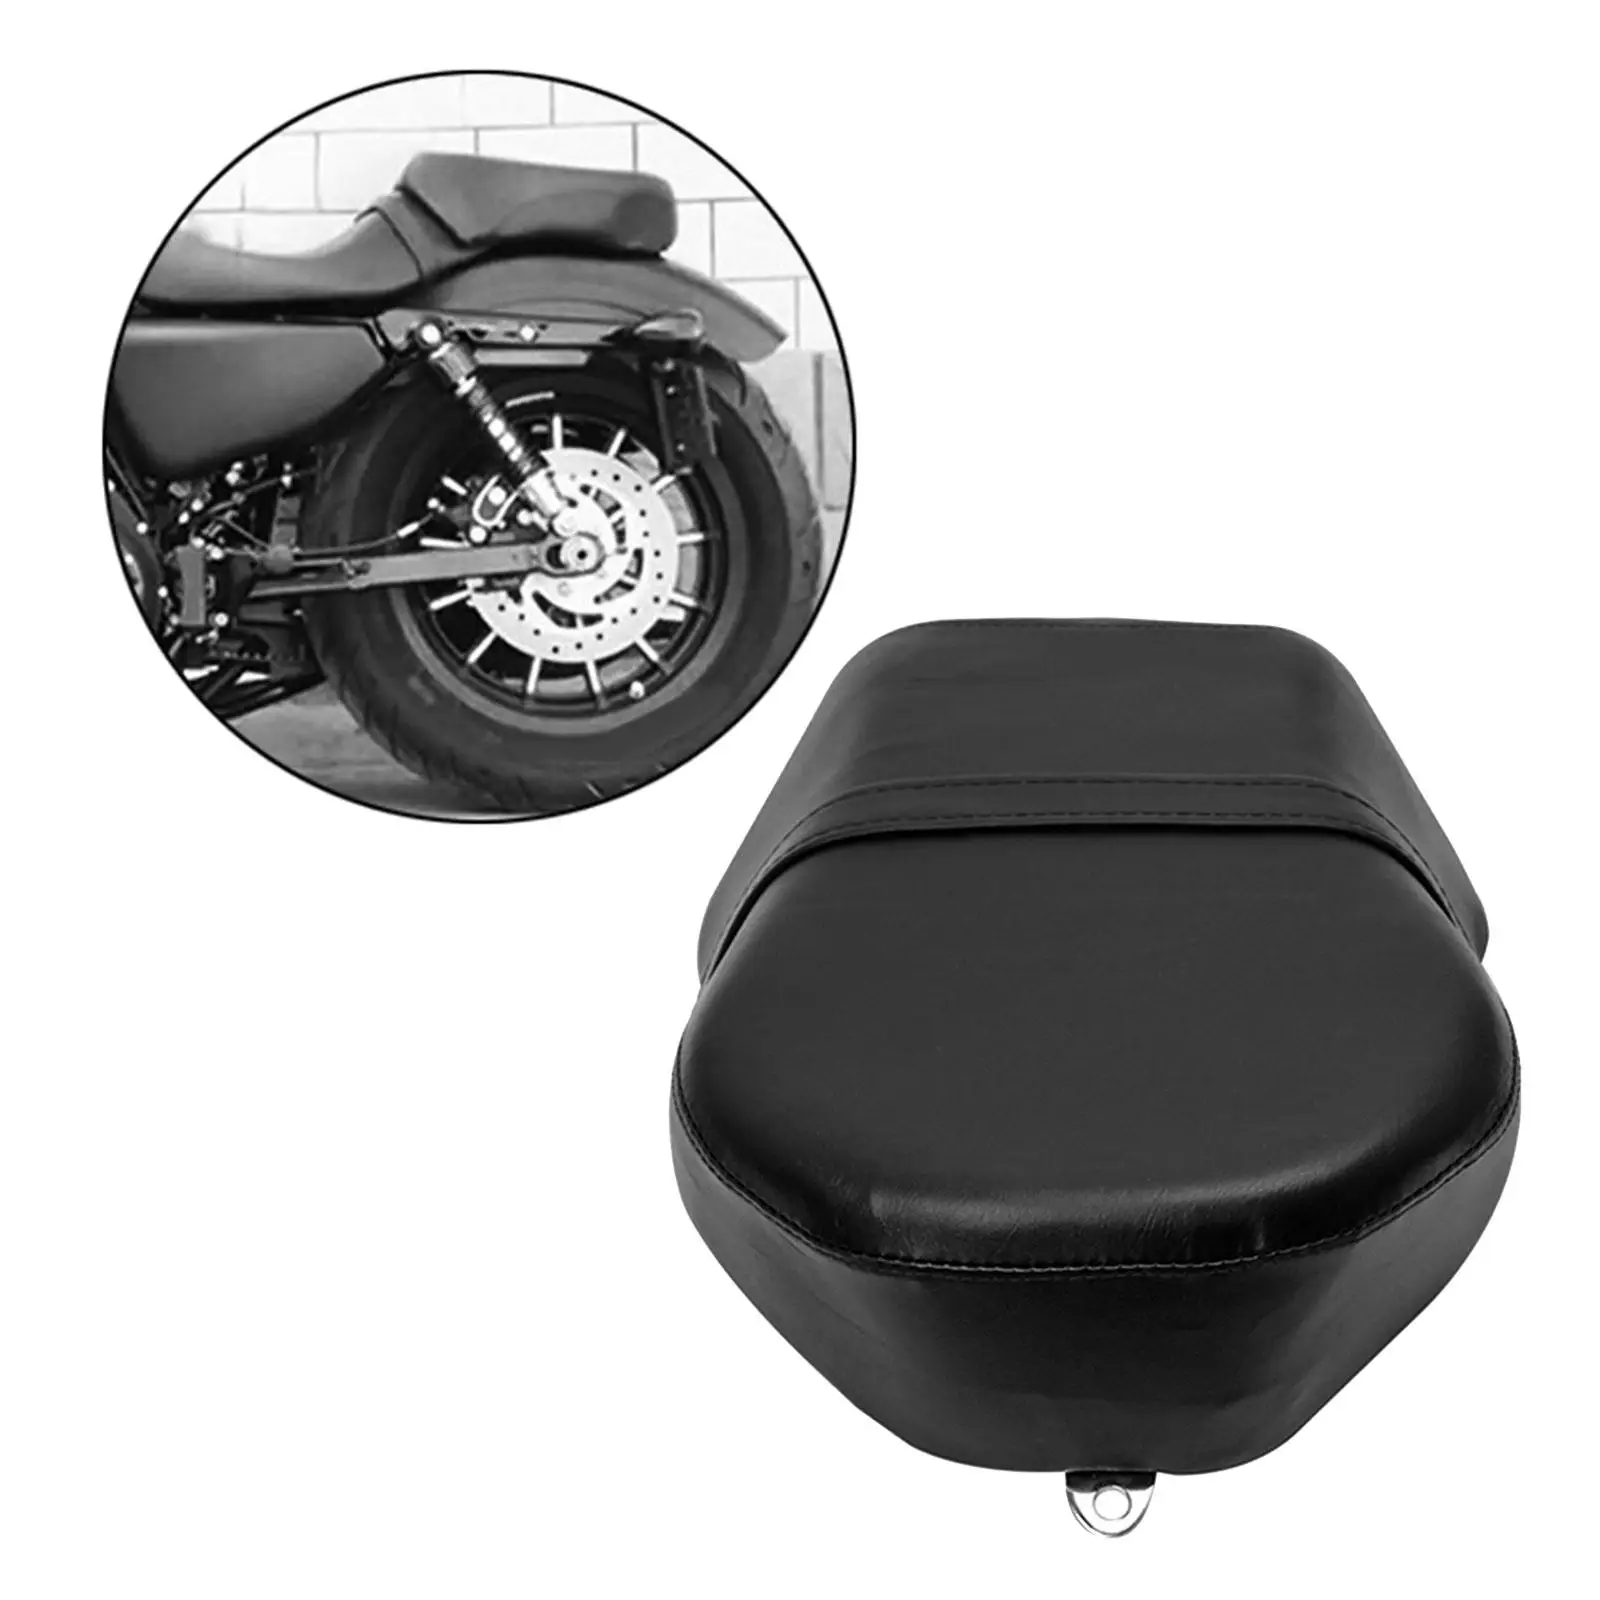 Motorcycle Pillion Passenger Pad for Harley Sportster Professional